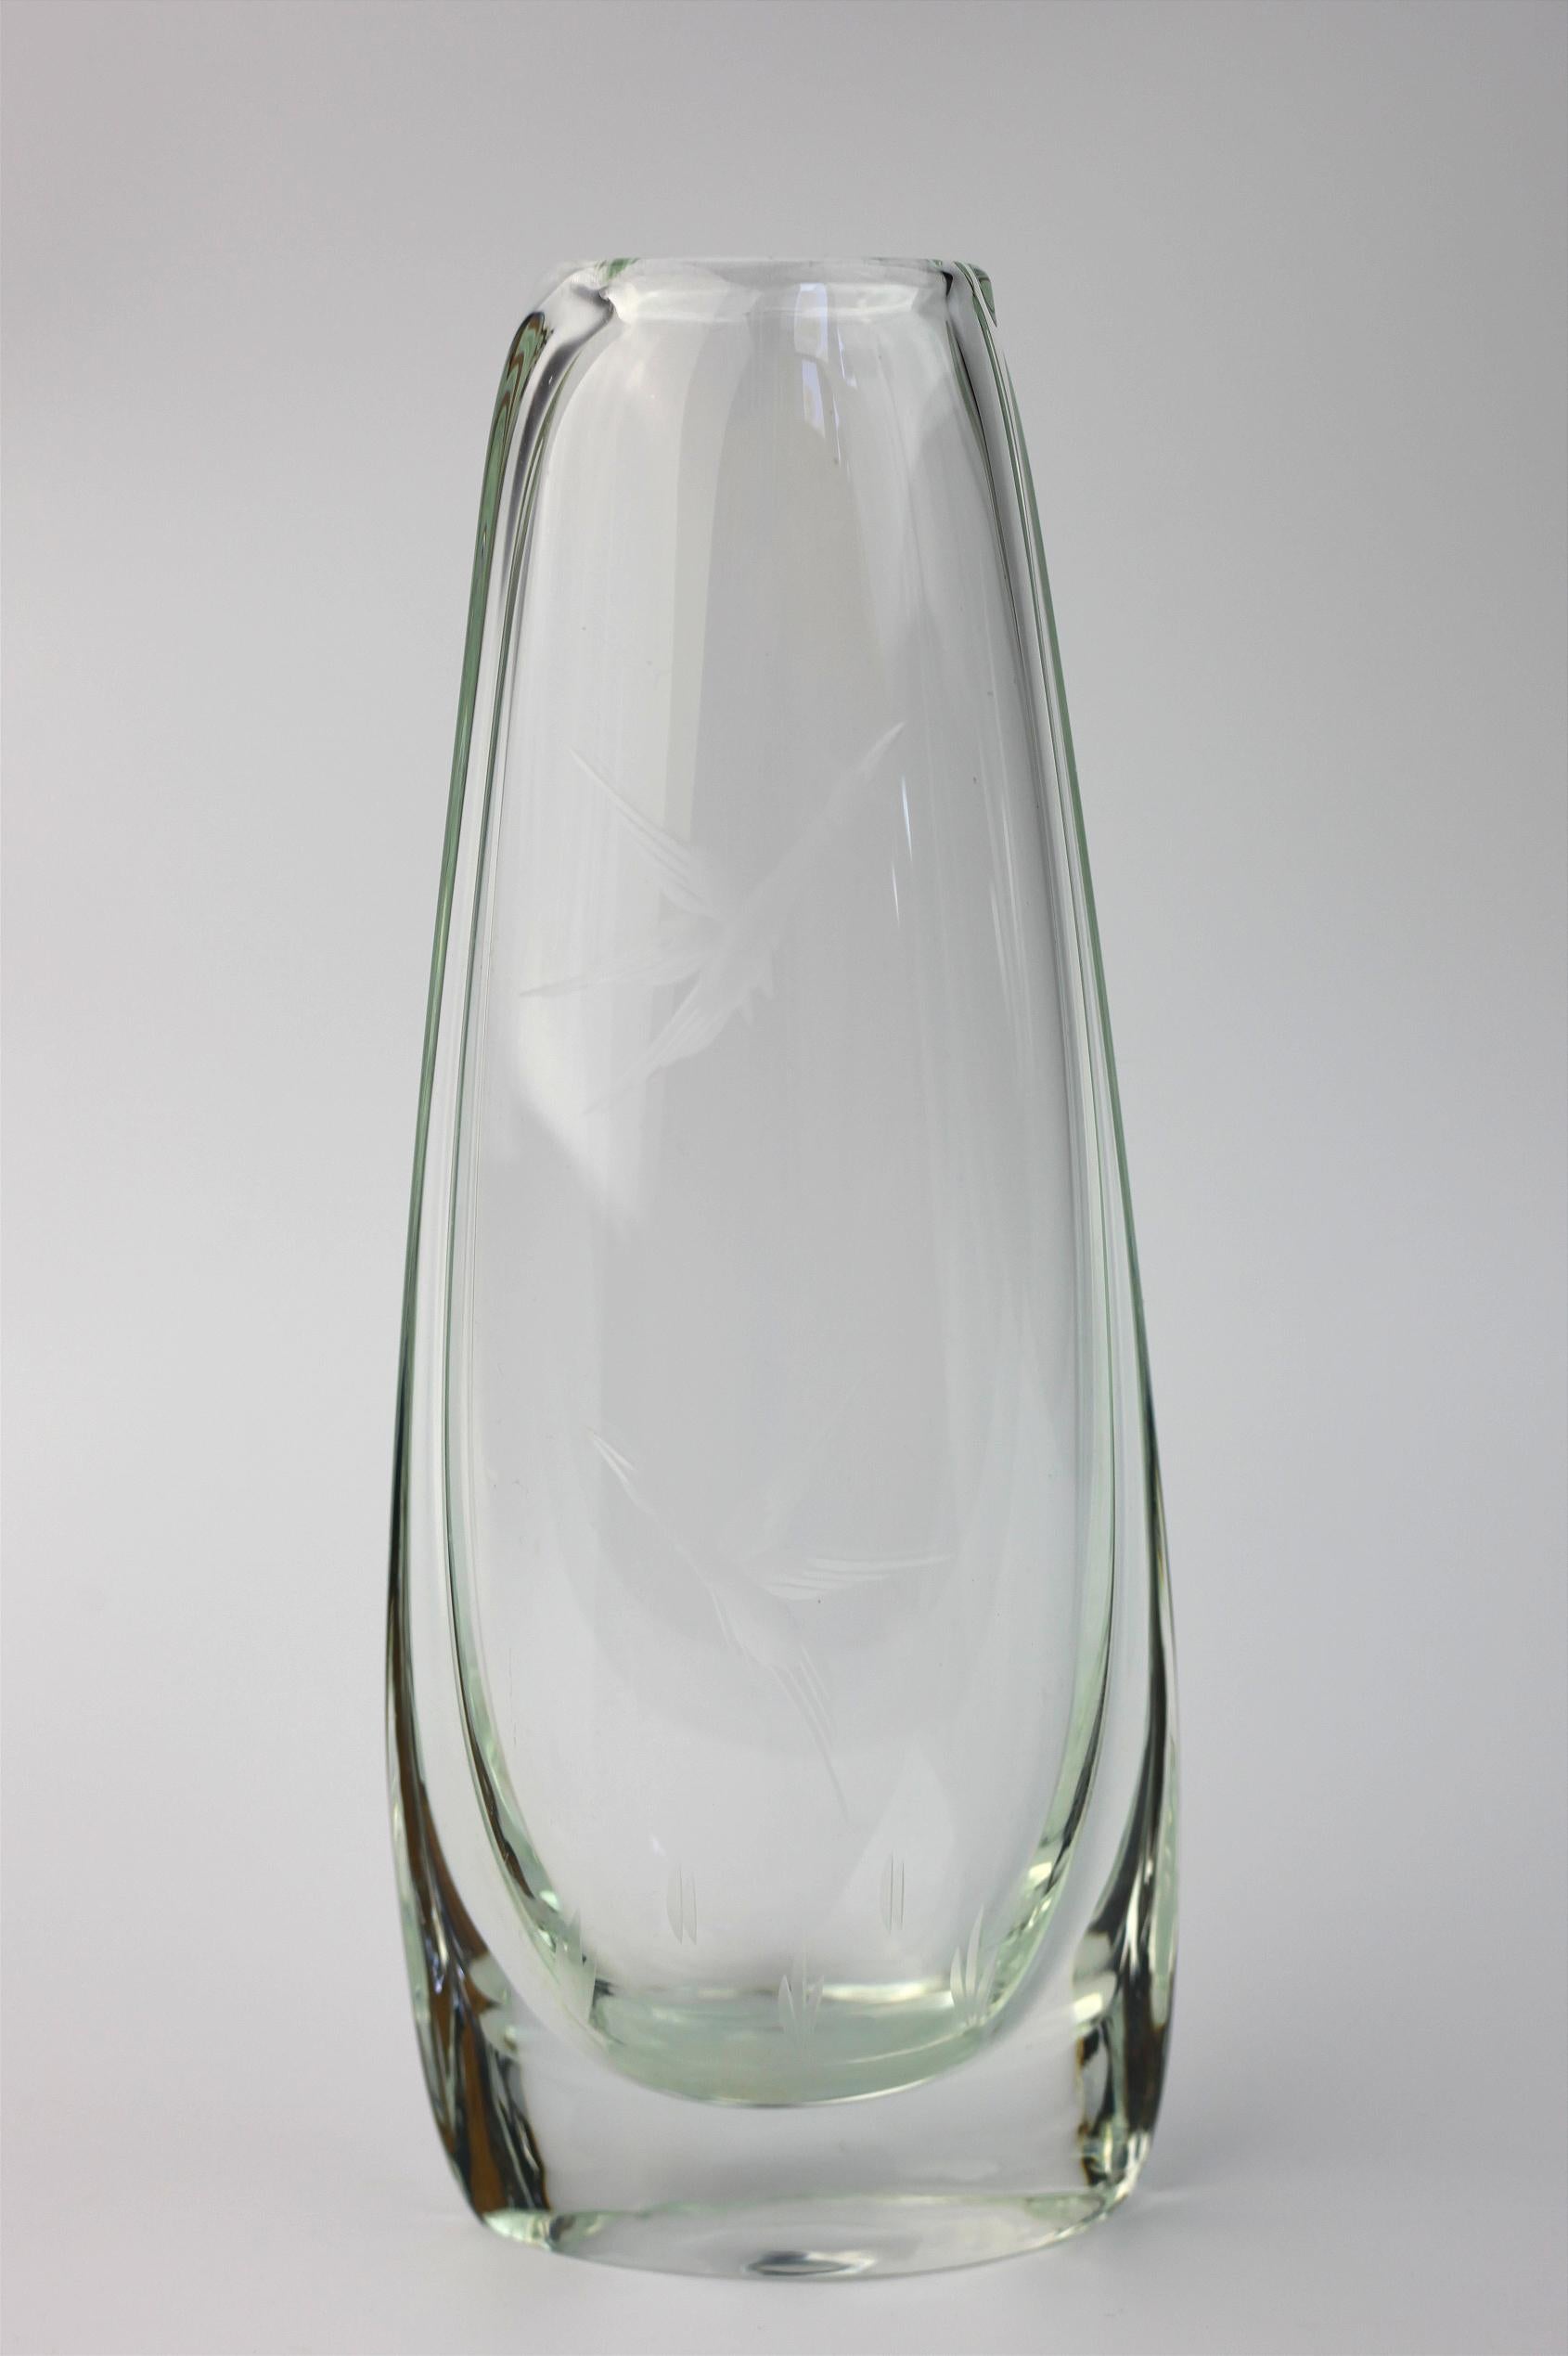 Swedish Mid-Century Modernist vase with two nice bird engravings 

It stands 24 cm tall and have a nice clean look. 

It could possibly be from the Orrefors glasswork factory but it is unknown.